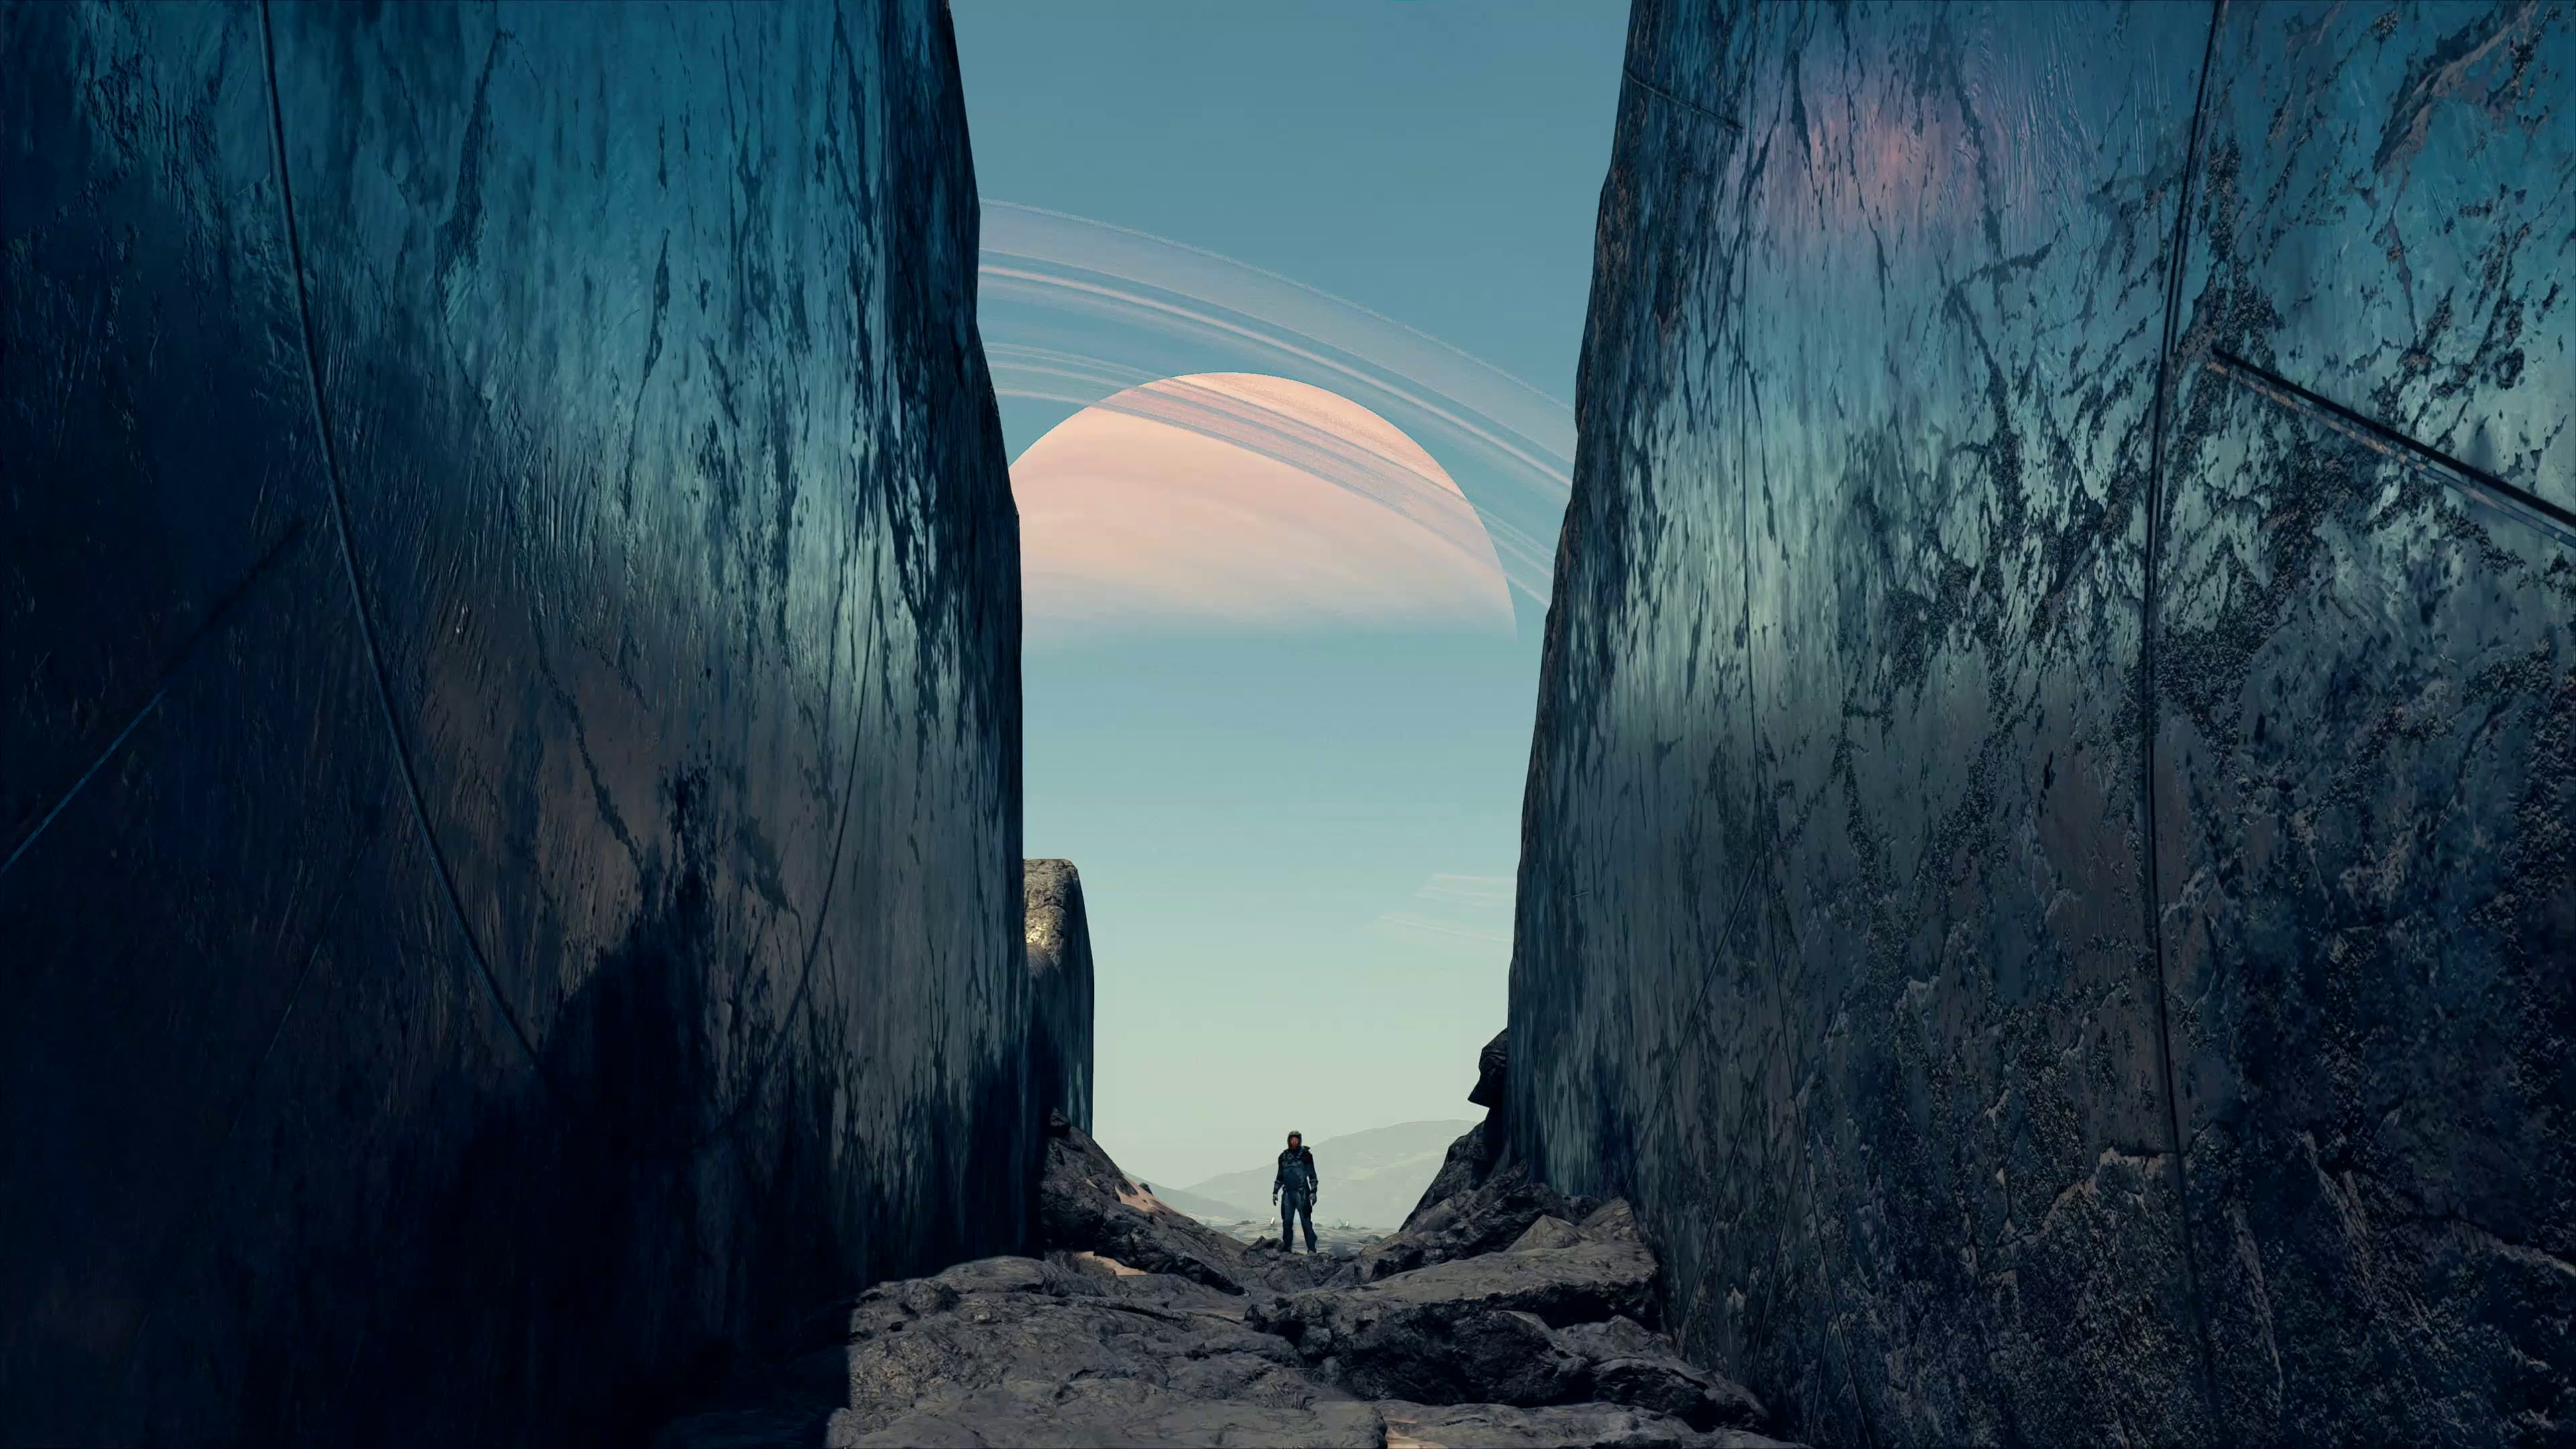 A screenshot of Starfield, showing a space explorer standing in a valley with a ringed planet visible in the atmosphere